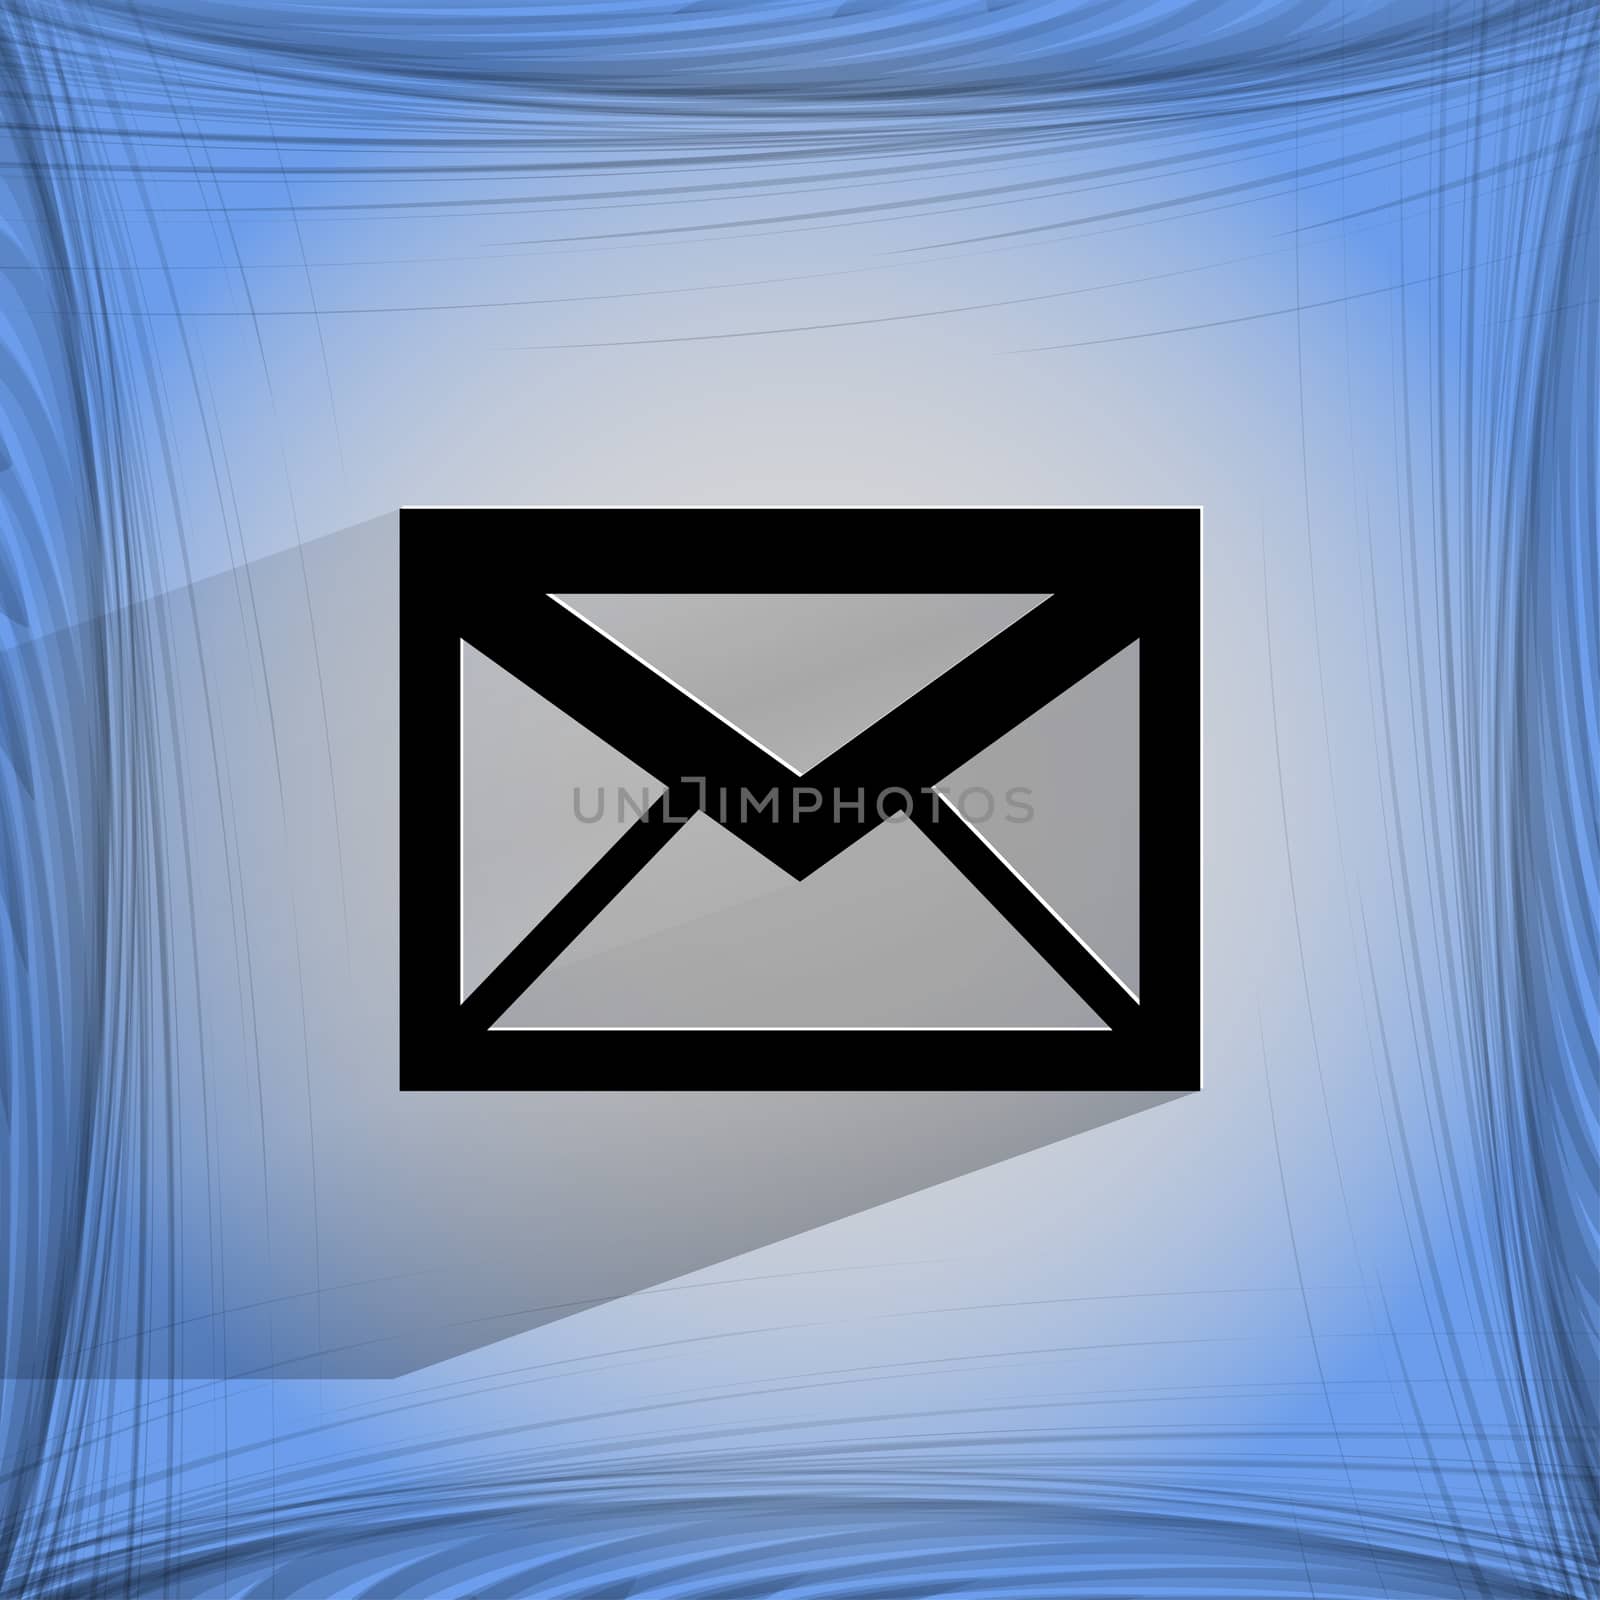 mail. envelope.  Flat modern web design on a flat geometric abstract background . 